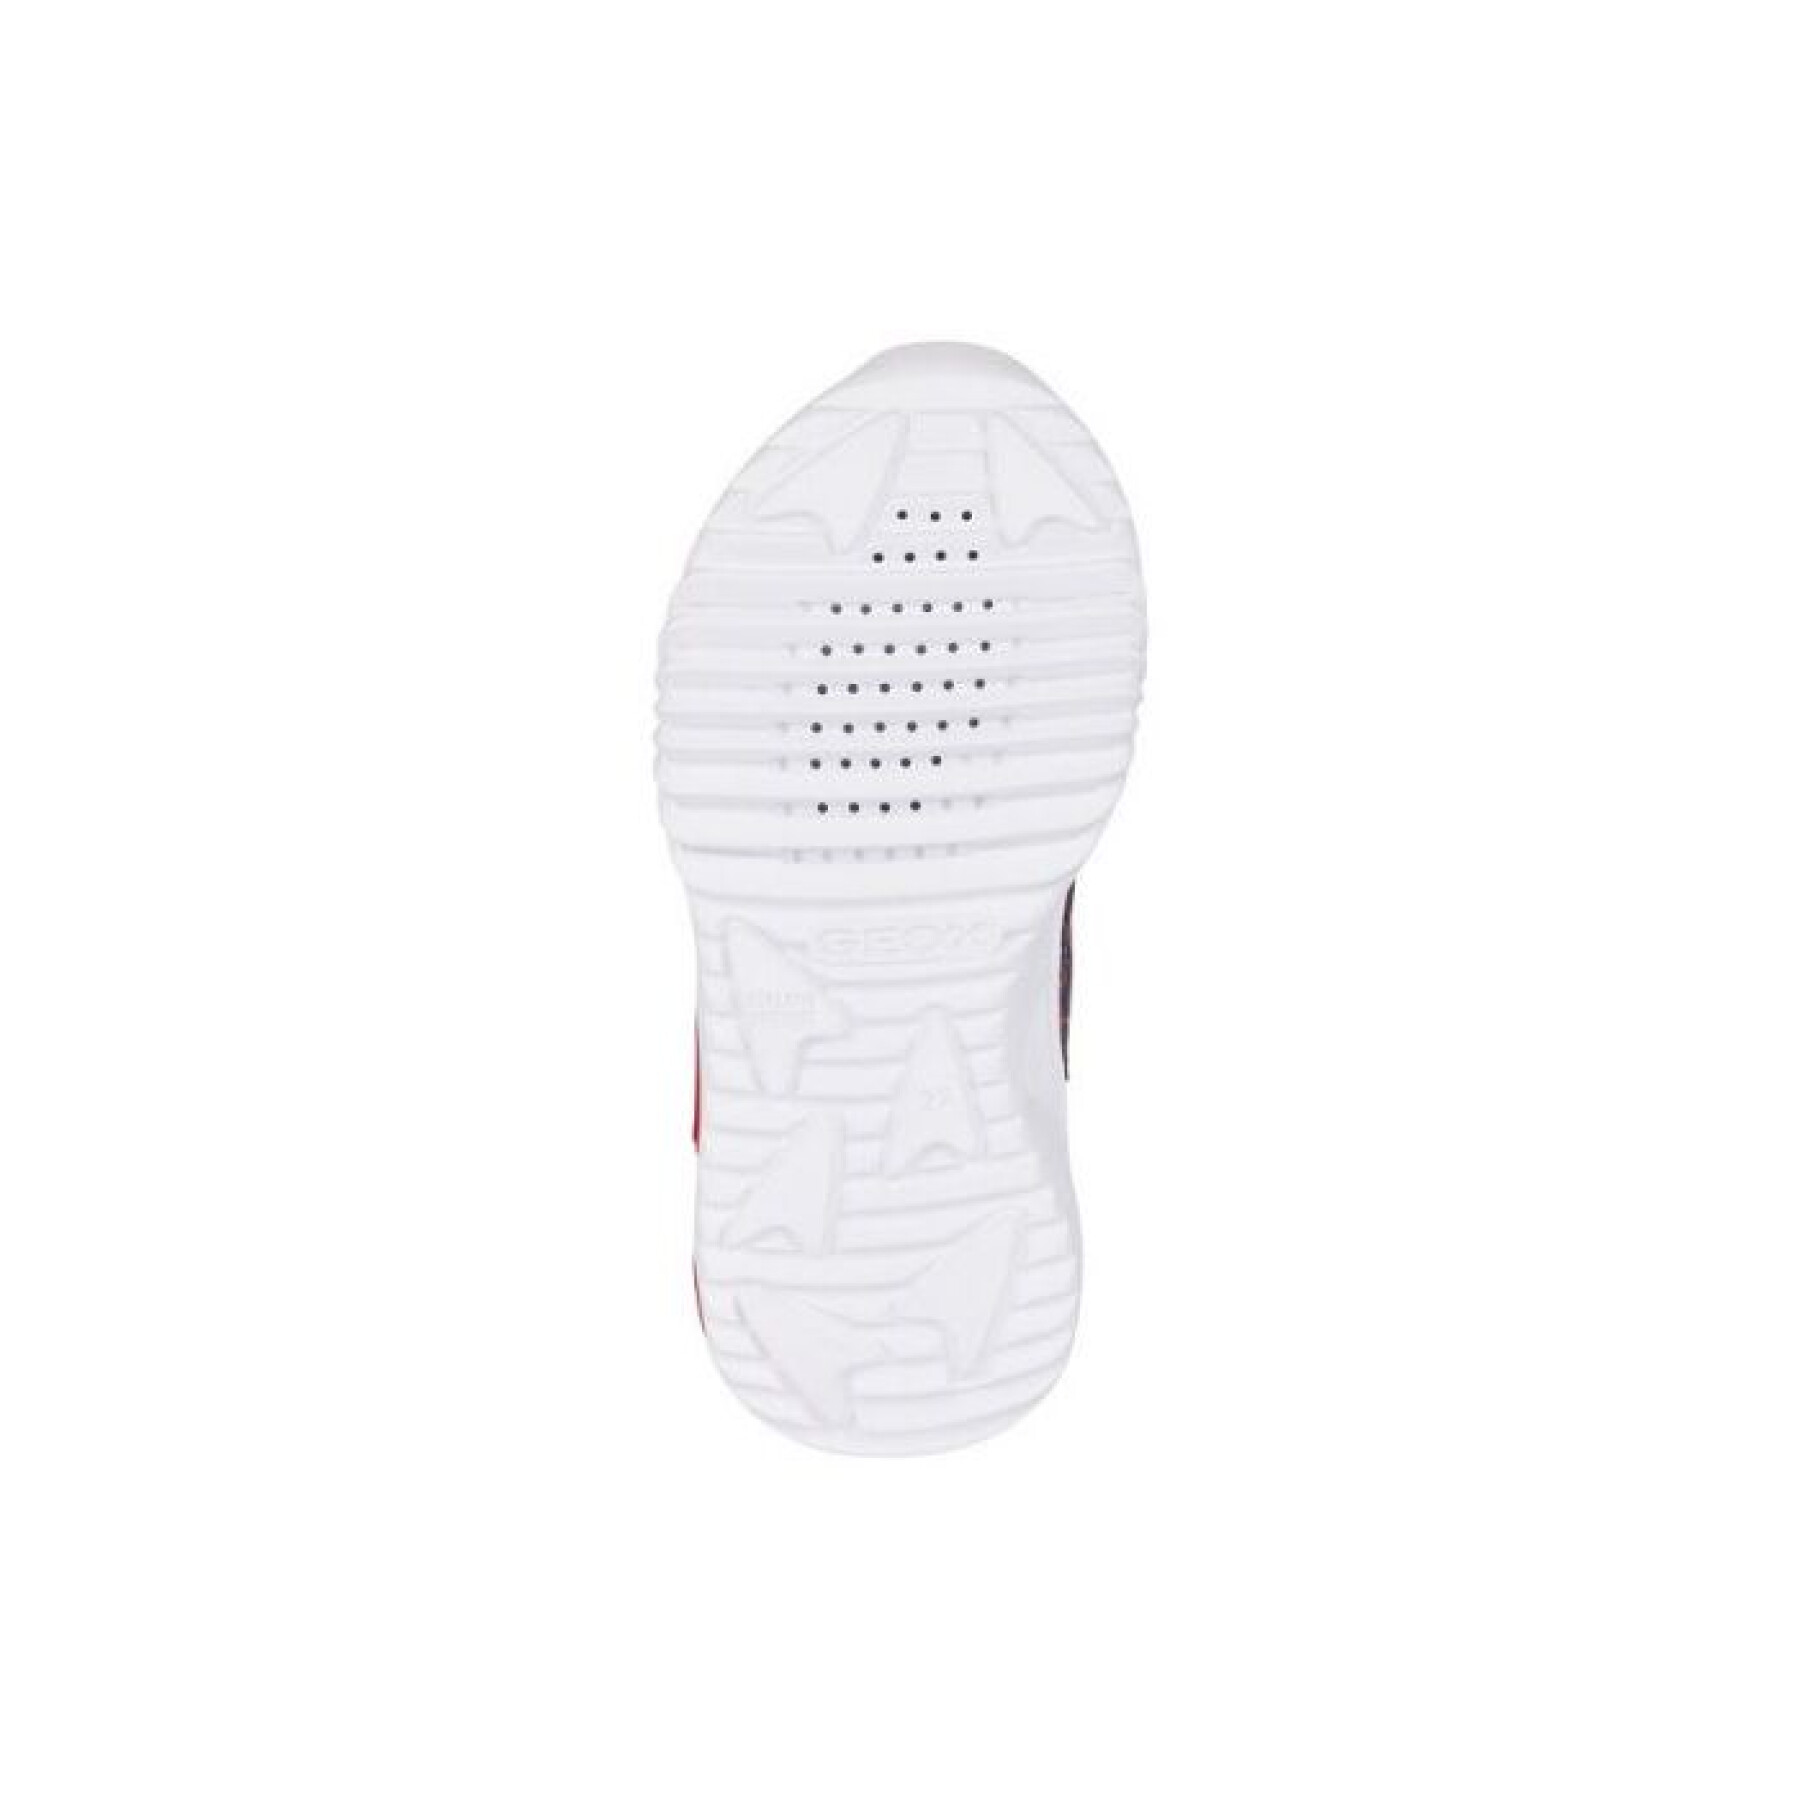 Baby boy sneakers Geox Assister